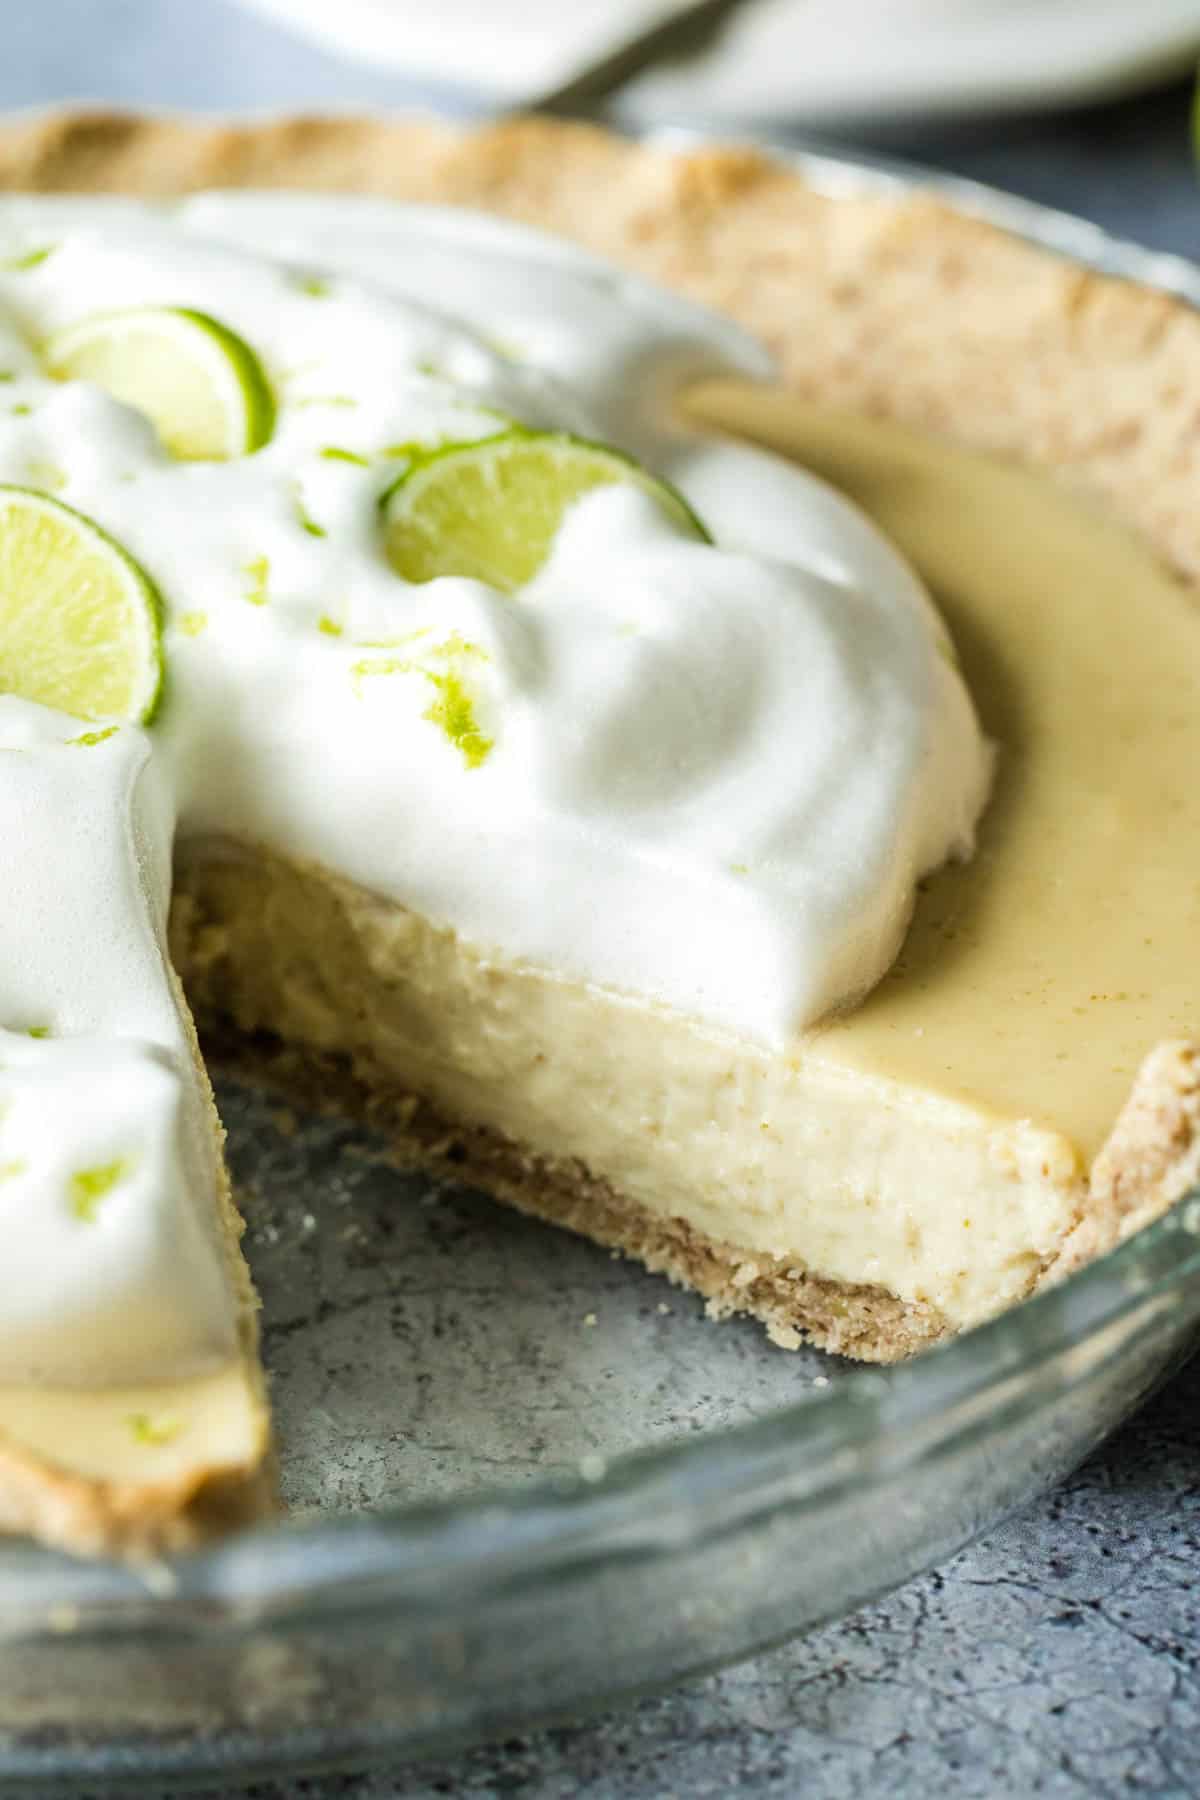 Key lime pie in a glass pie plate with a slice removed so you can see the inside of the creamy tofu filling.